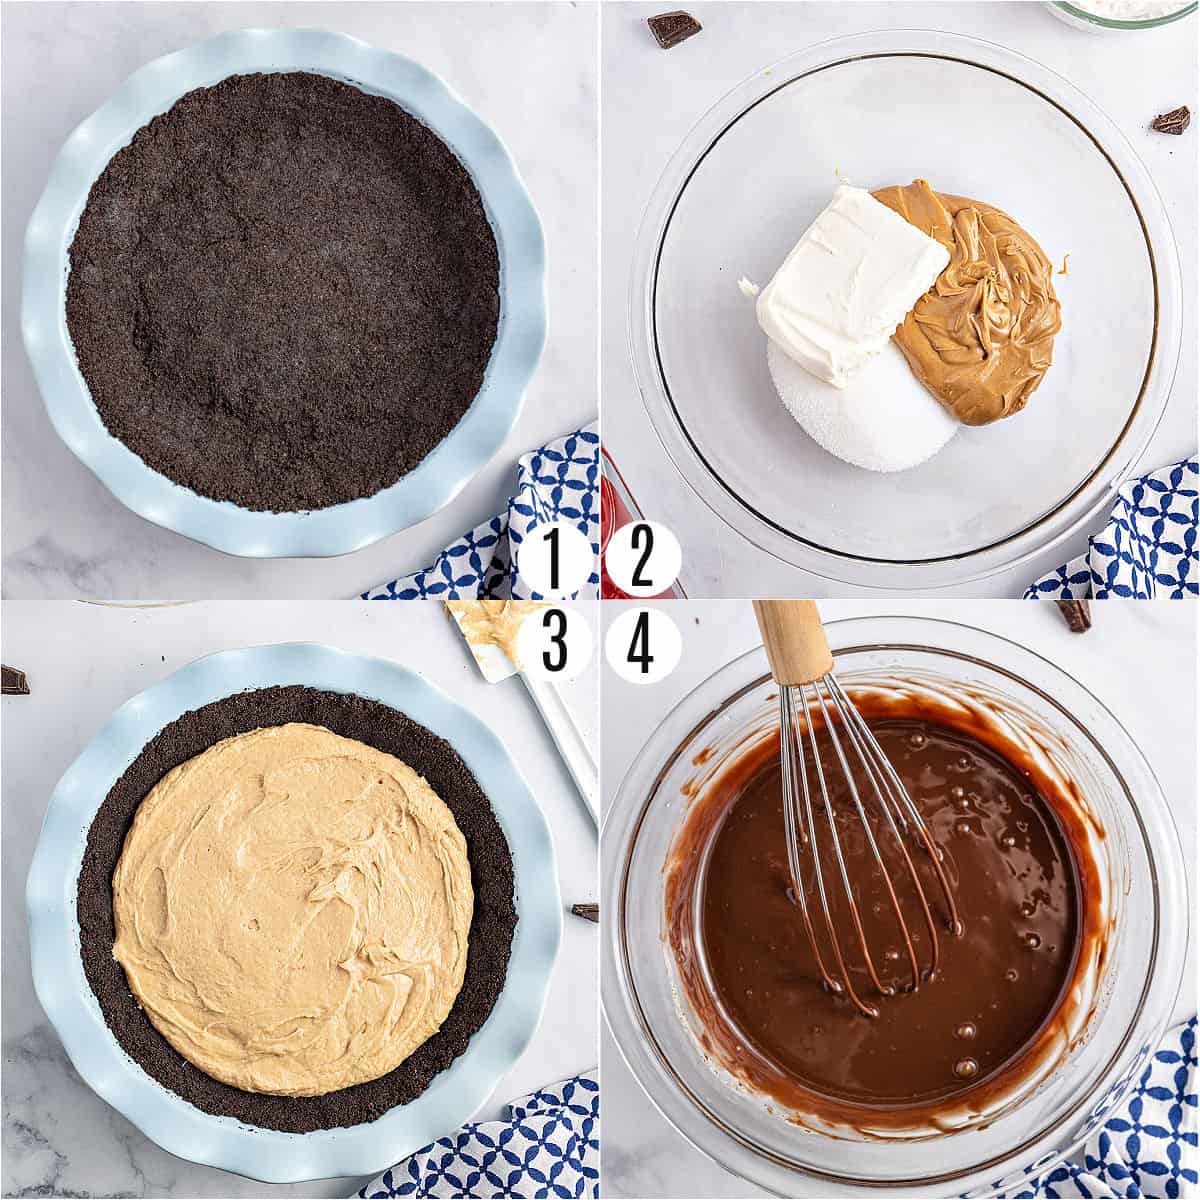 Step by step photos showing how to make chocolate peanut butter pie.